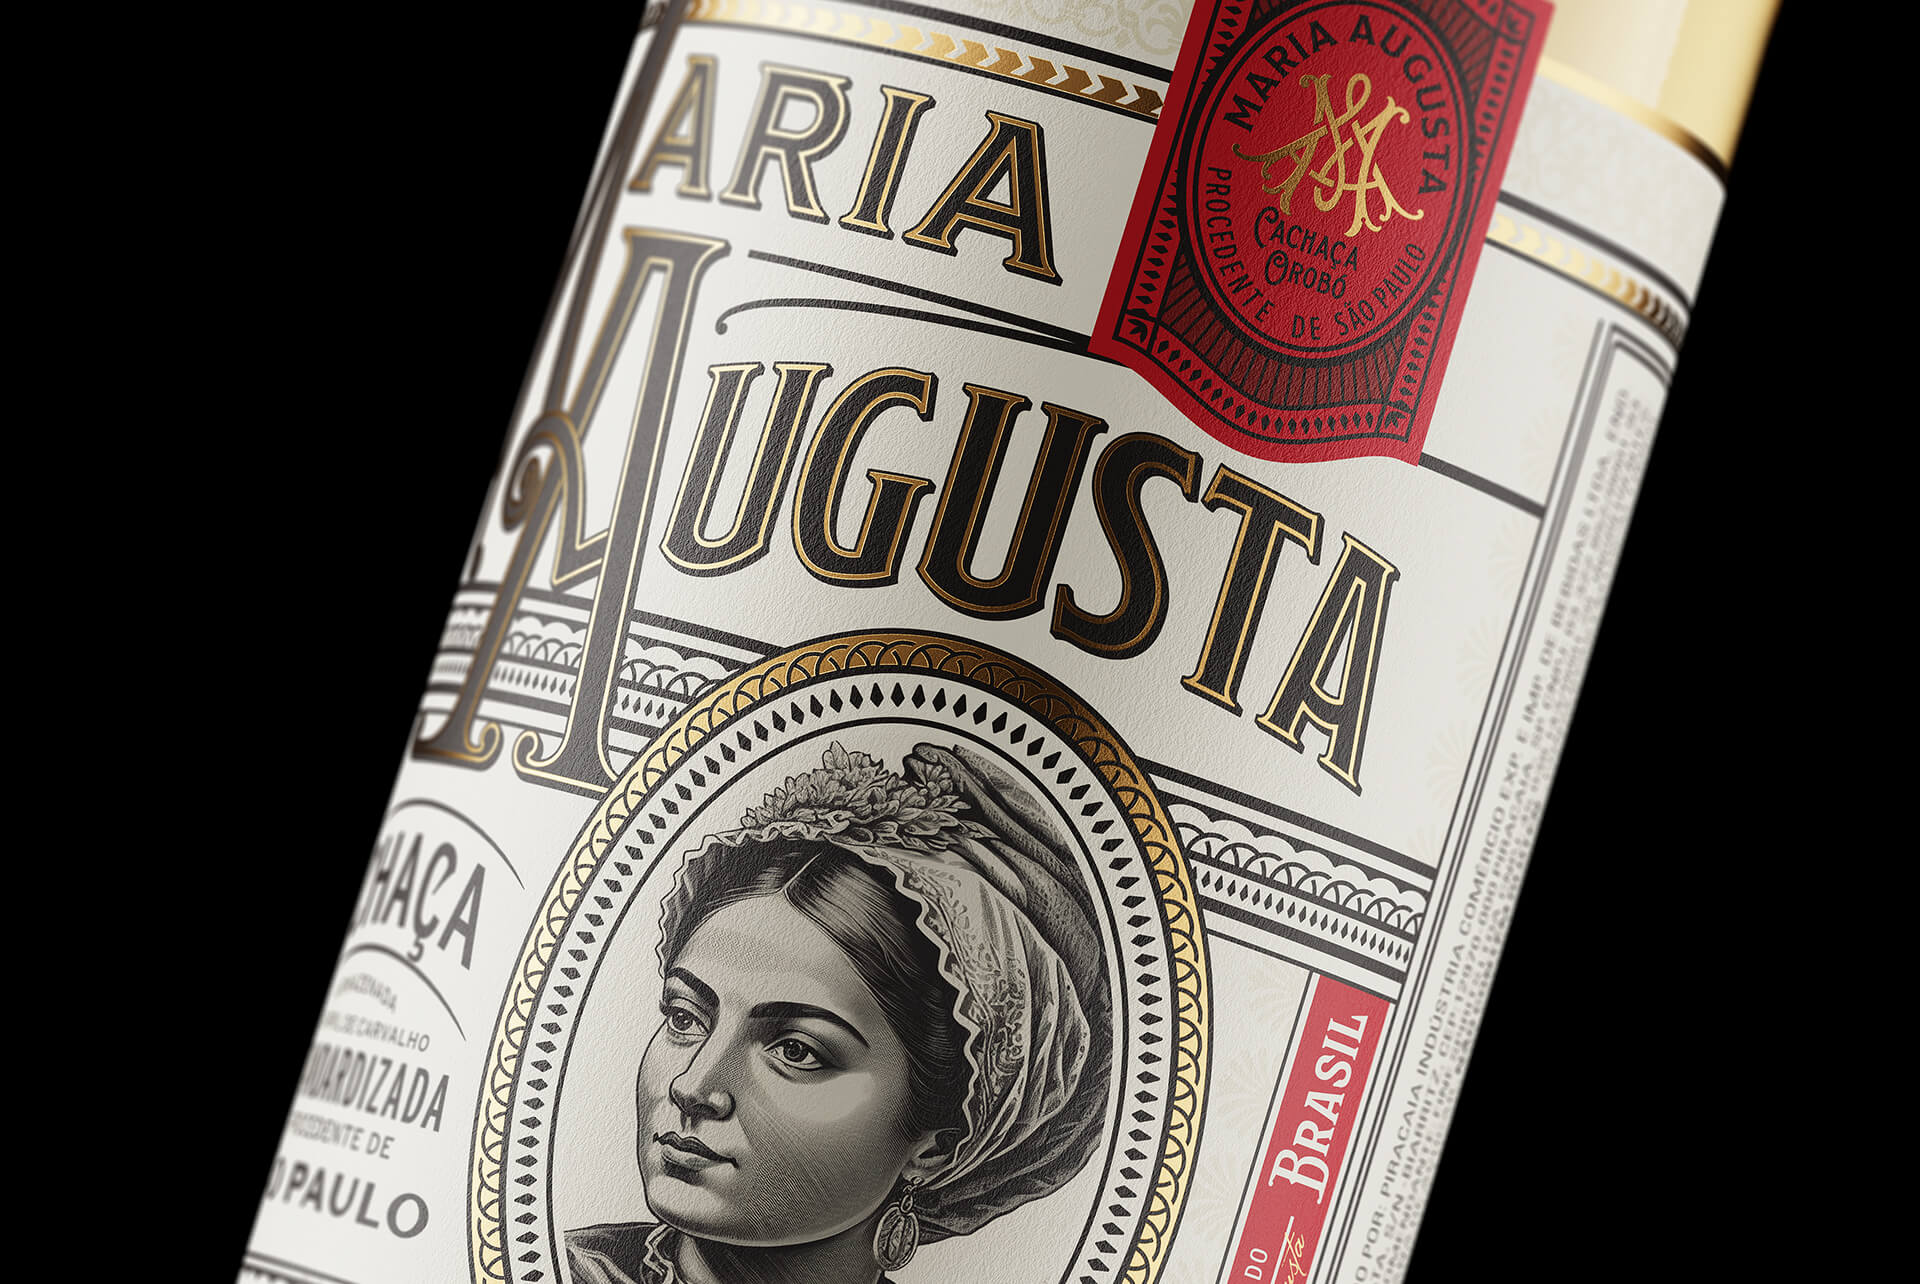 Holy Studio Creates Packaging Design for Maria Augusta, Unveiling the Immigrants Cachaça Legacy